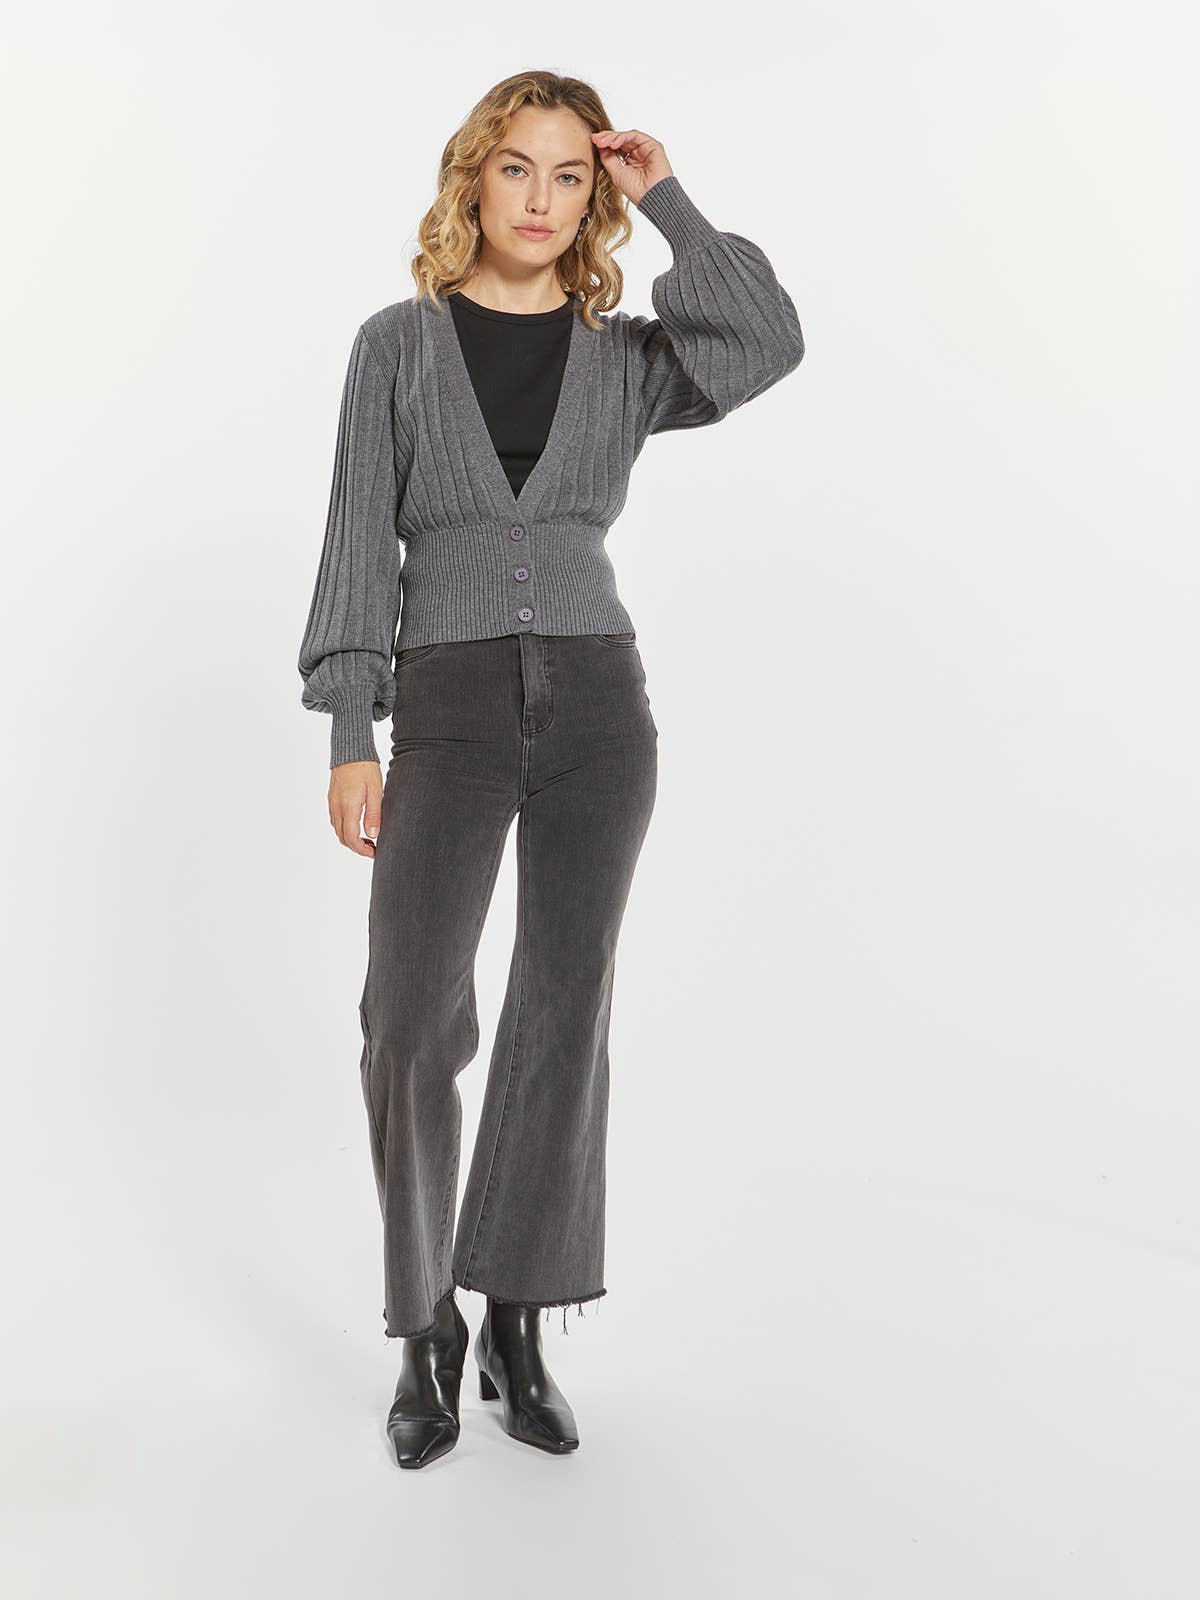 Heather Grey Ribbed Knit Sweater - Mae Sweater Fall-Winter Weekend Los Angeles